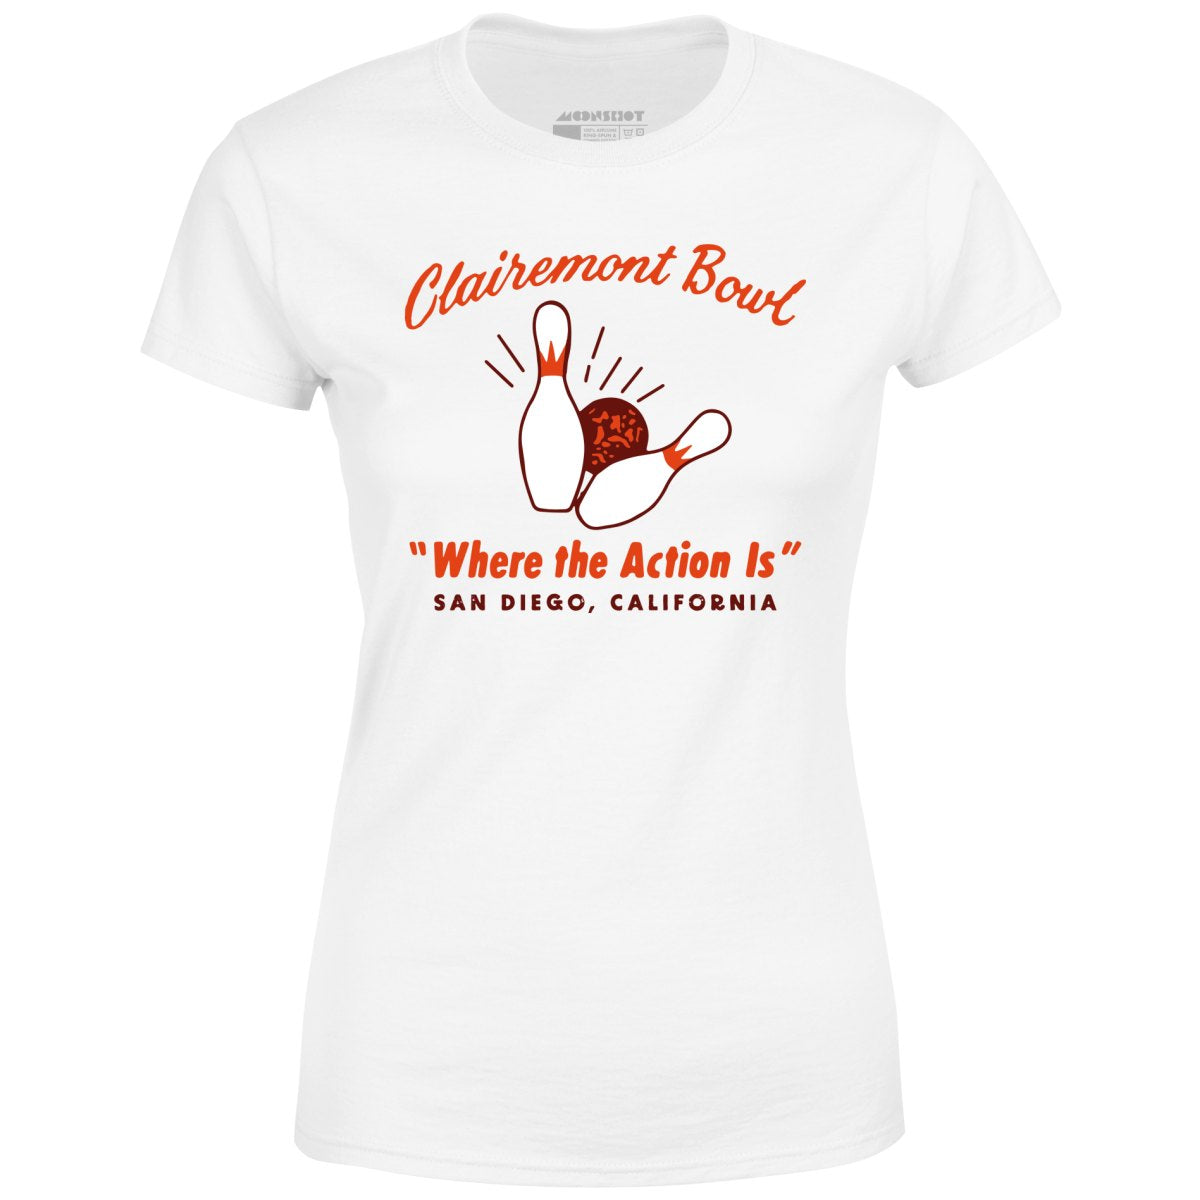 Clairemont Bowl - San Diego, CA - Vintage Bowling Alley - Women's T-Shirt